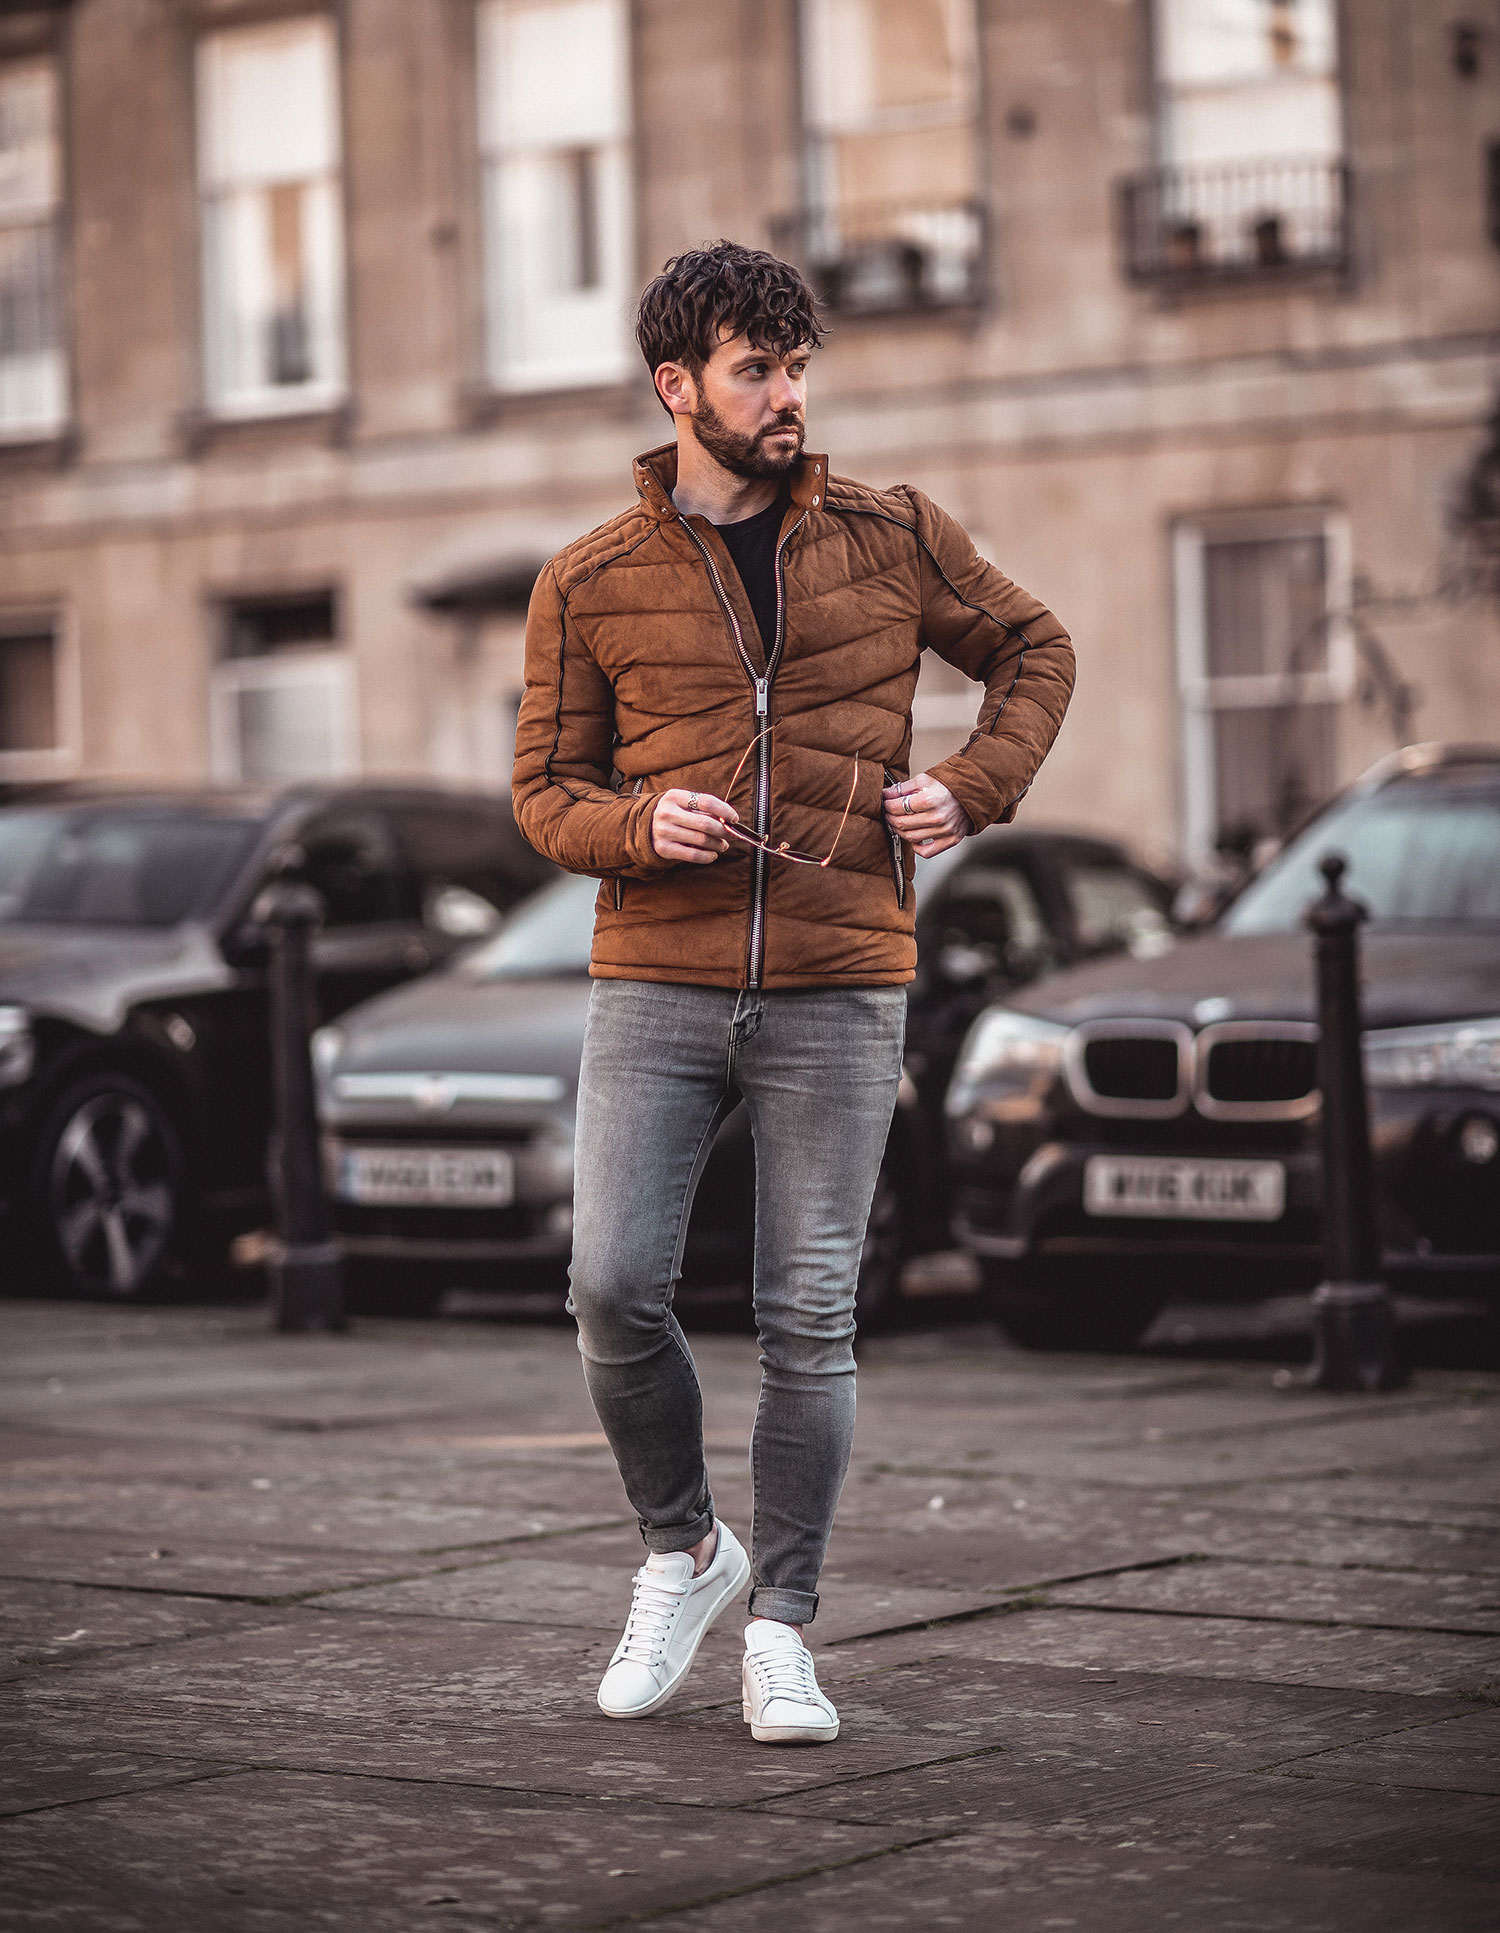 Brown Quilted Jacket Street Style Outfit - Your Average Guy